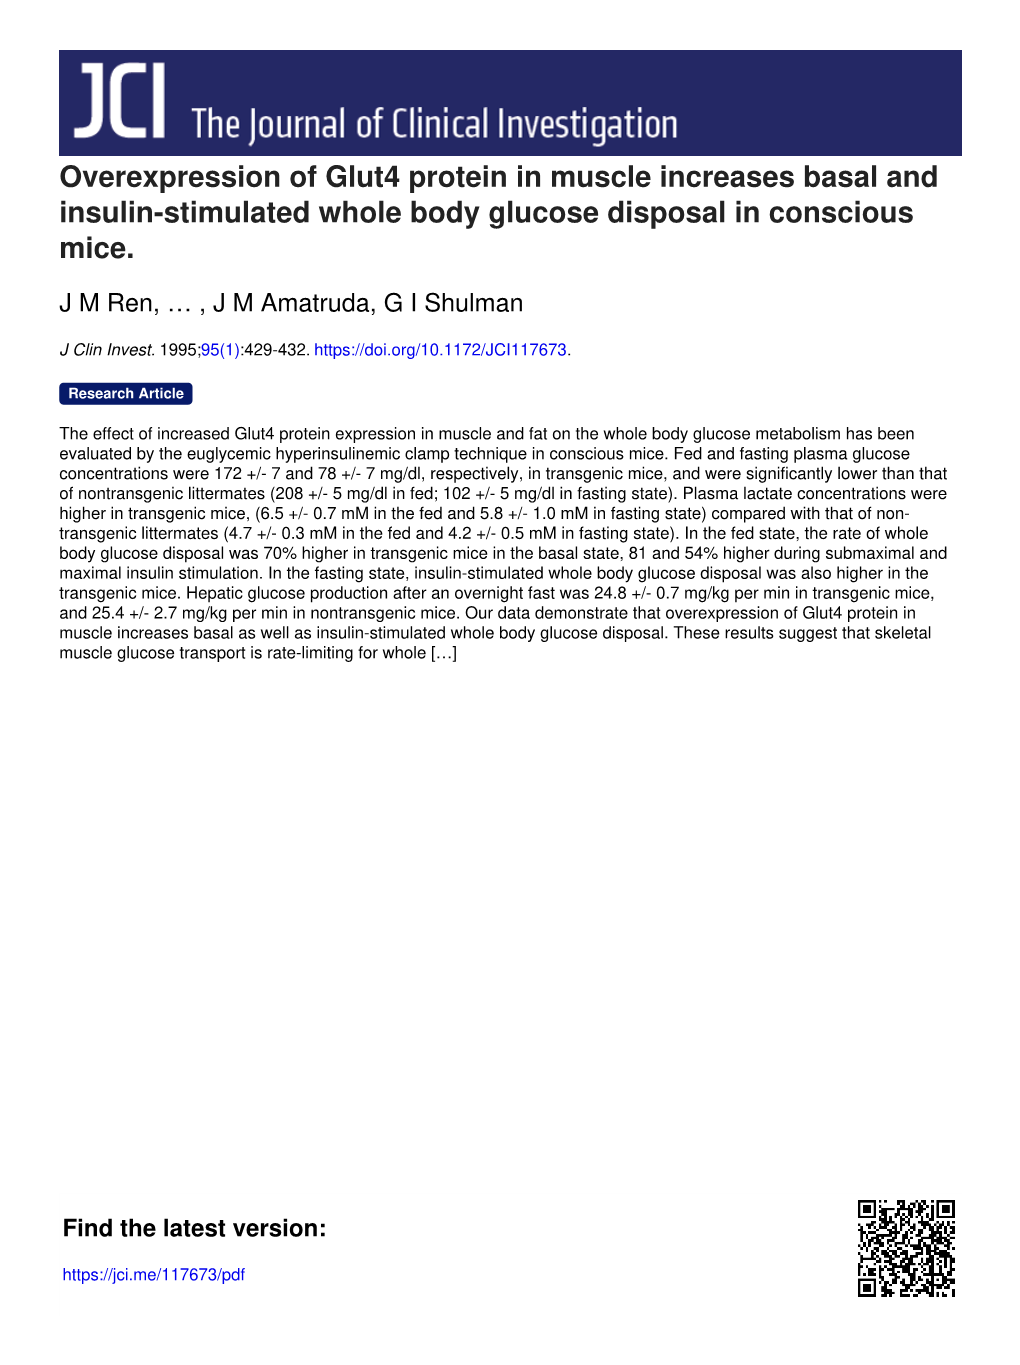 Overexpression of Glut4 Protein in Muscle Increases Basal and Insulin-Stimulated Whole Body Glucose Disposal in Conscious Mice